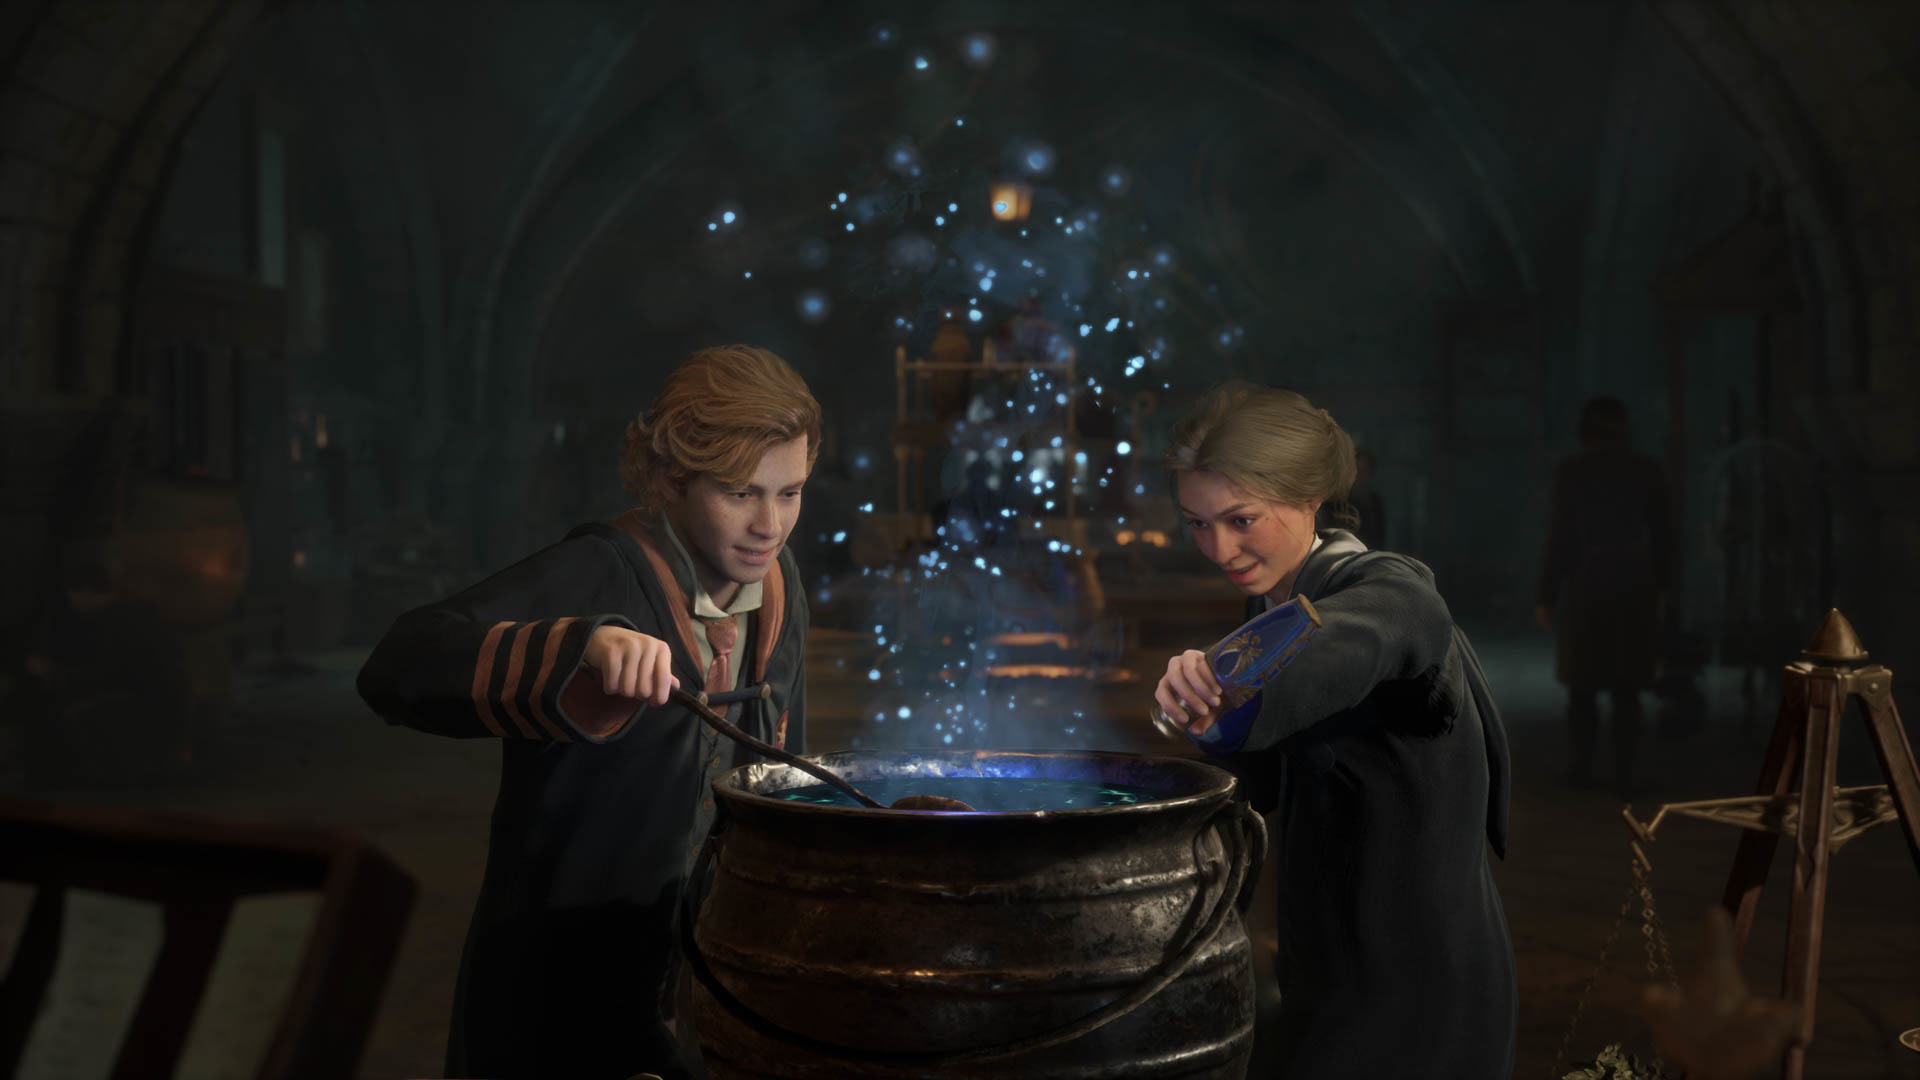 Two students brew a glowing blue potion